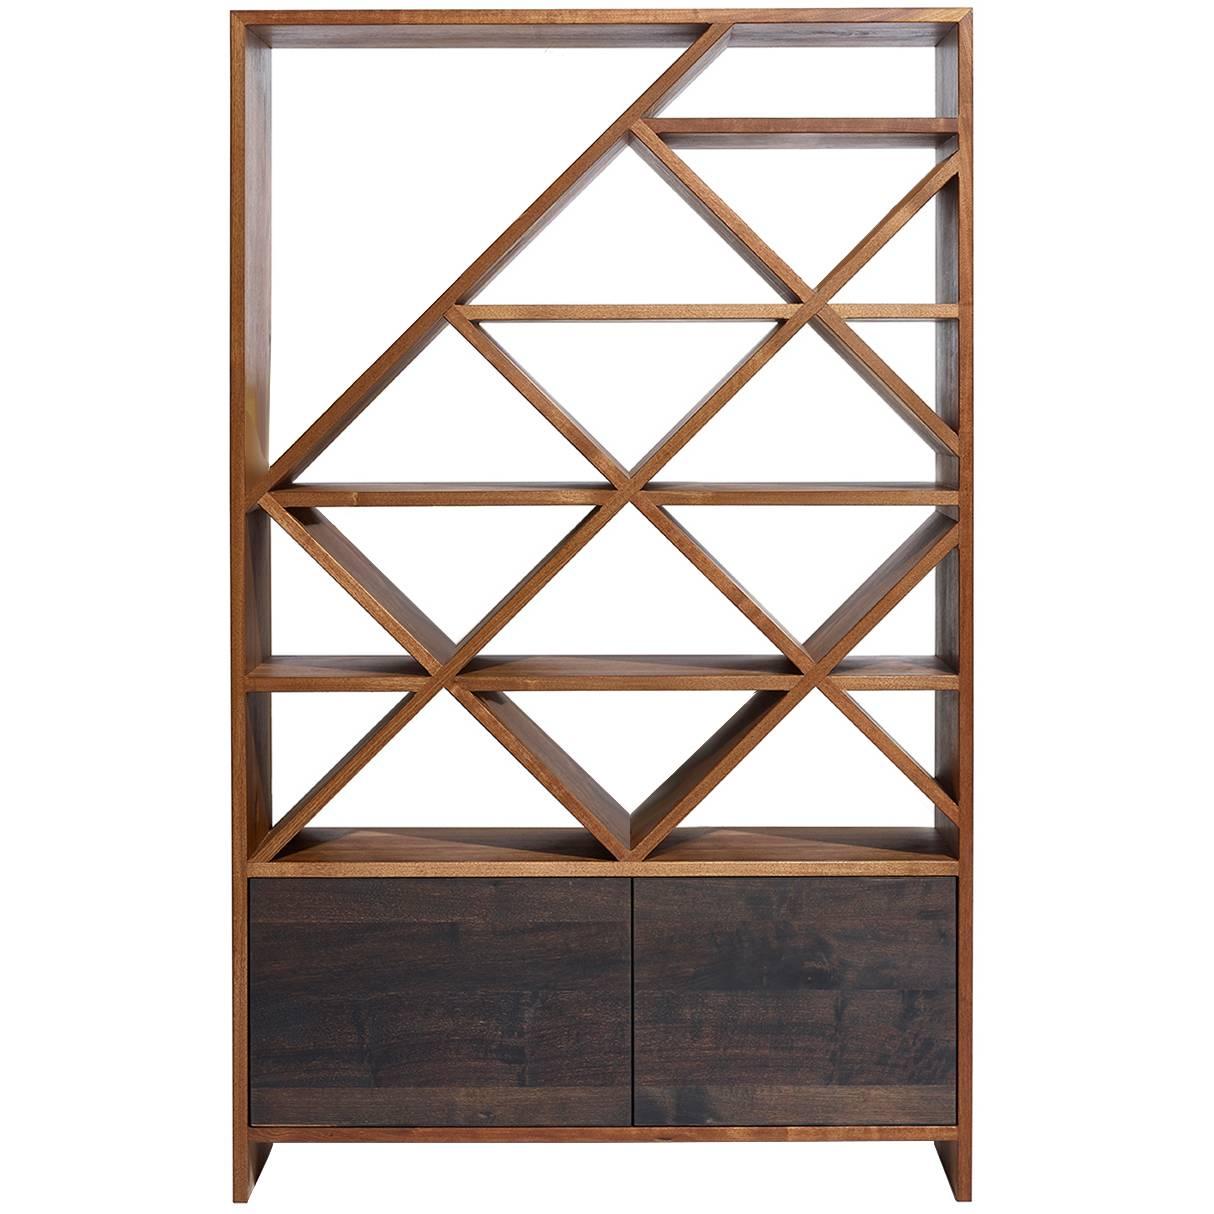 Hive Freestanding Bar Display Shelving Unit in Natural and Blackened Walnut For Sale